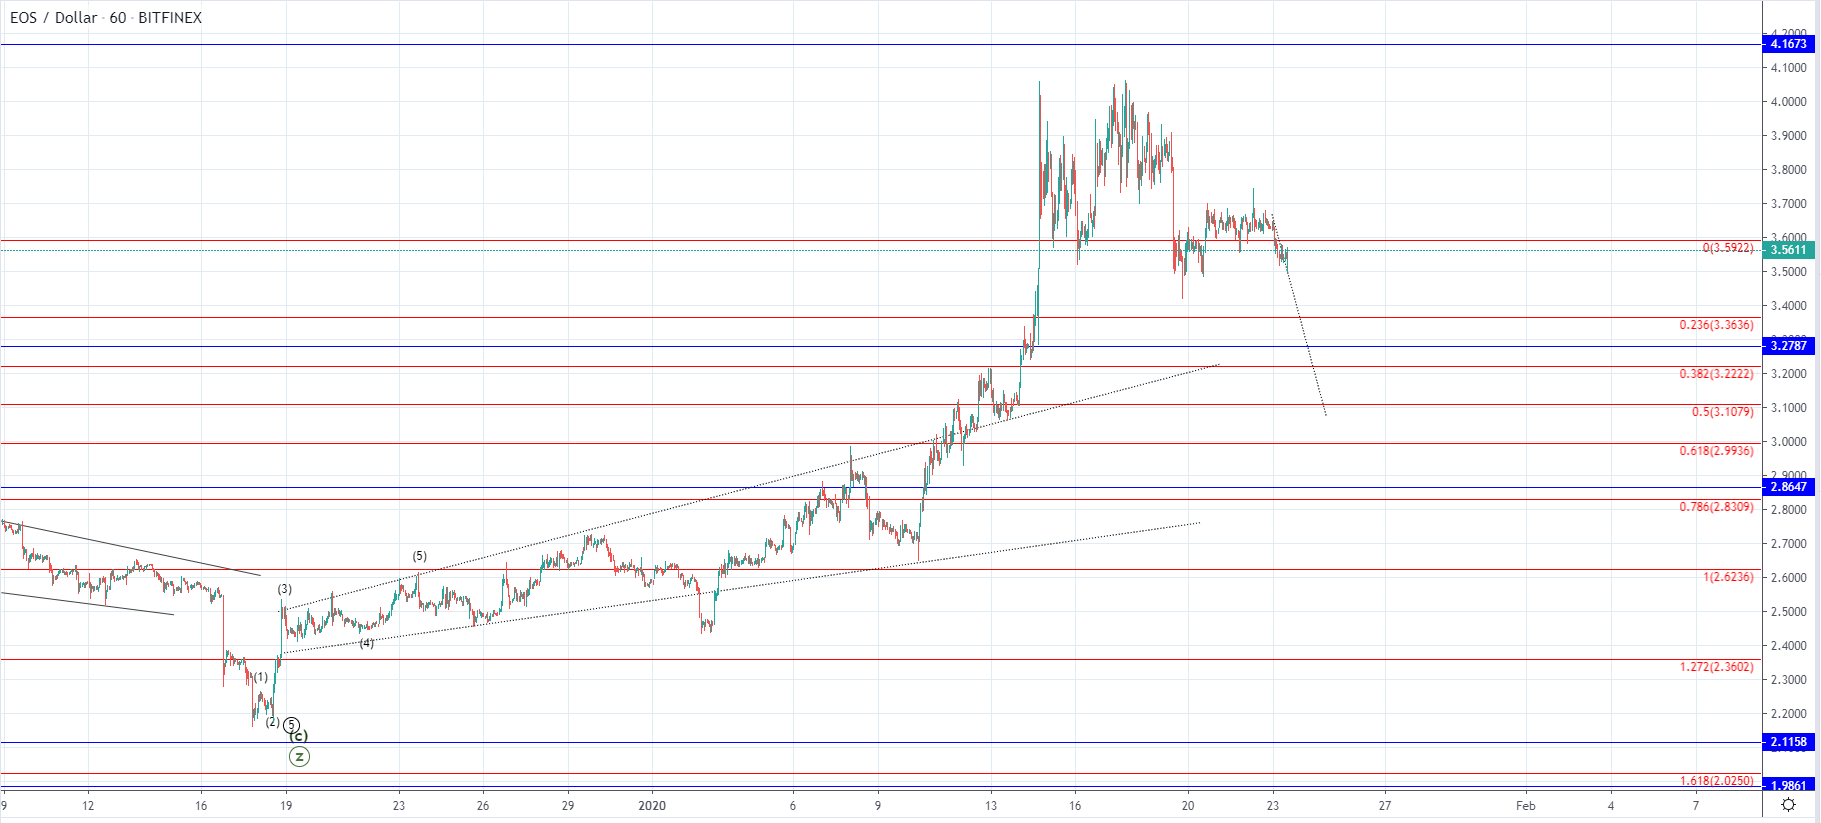 EOS/USD and LTC/USD - Further decline expected